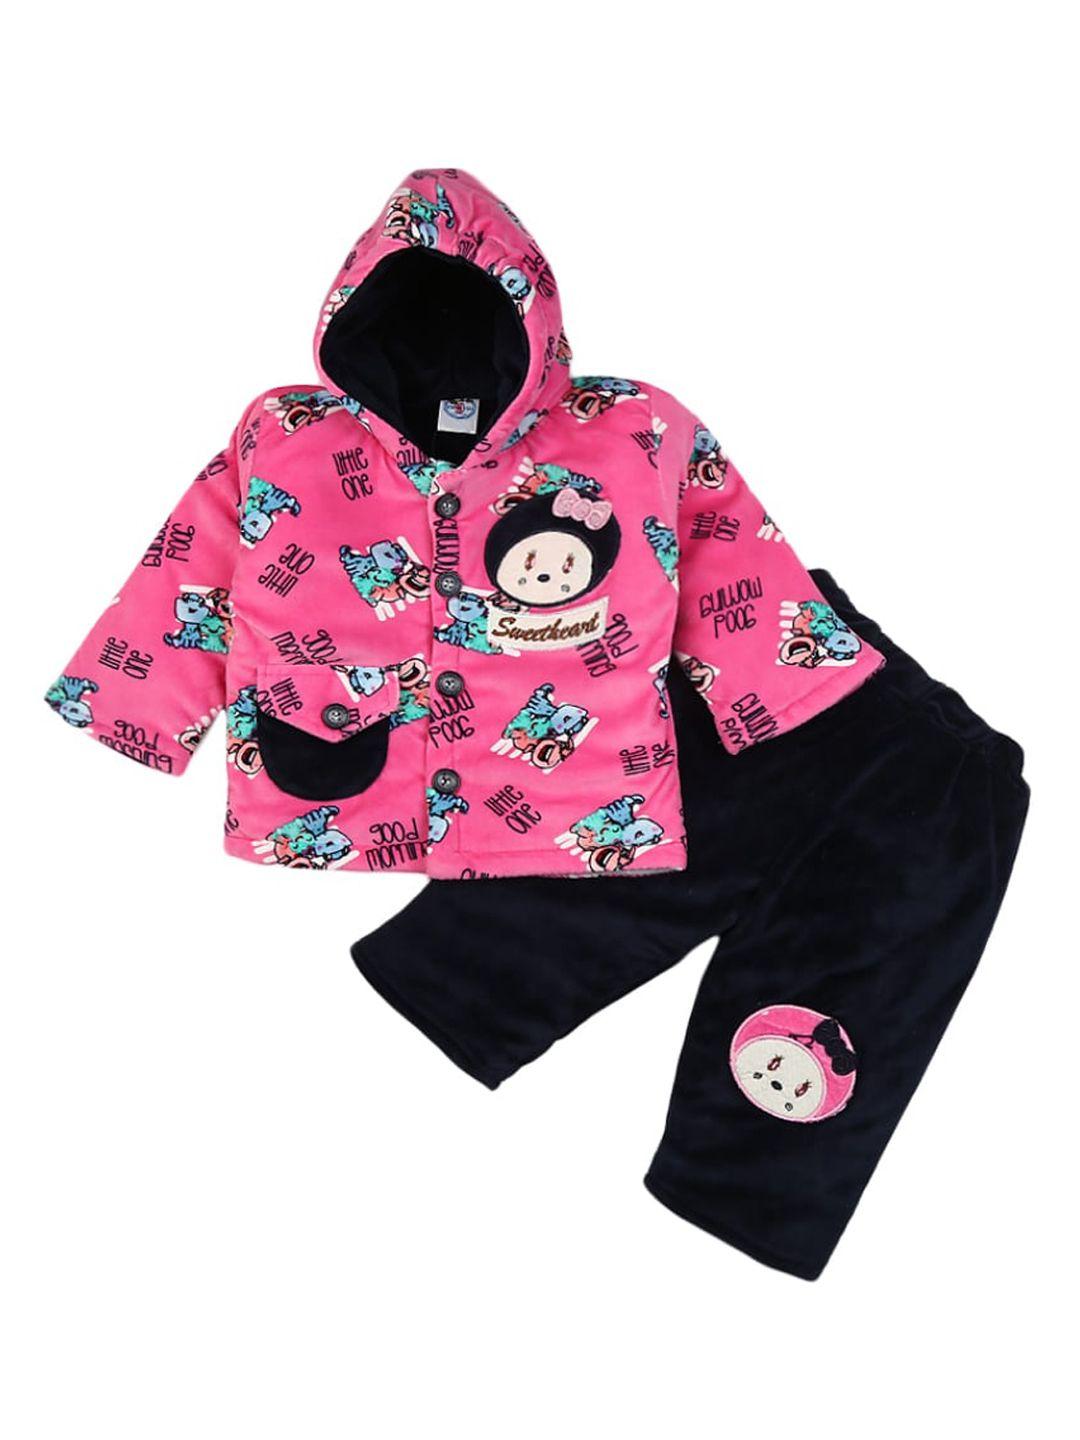 v-mart infants printed hooded pure cotton t-shirt with trousers